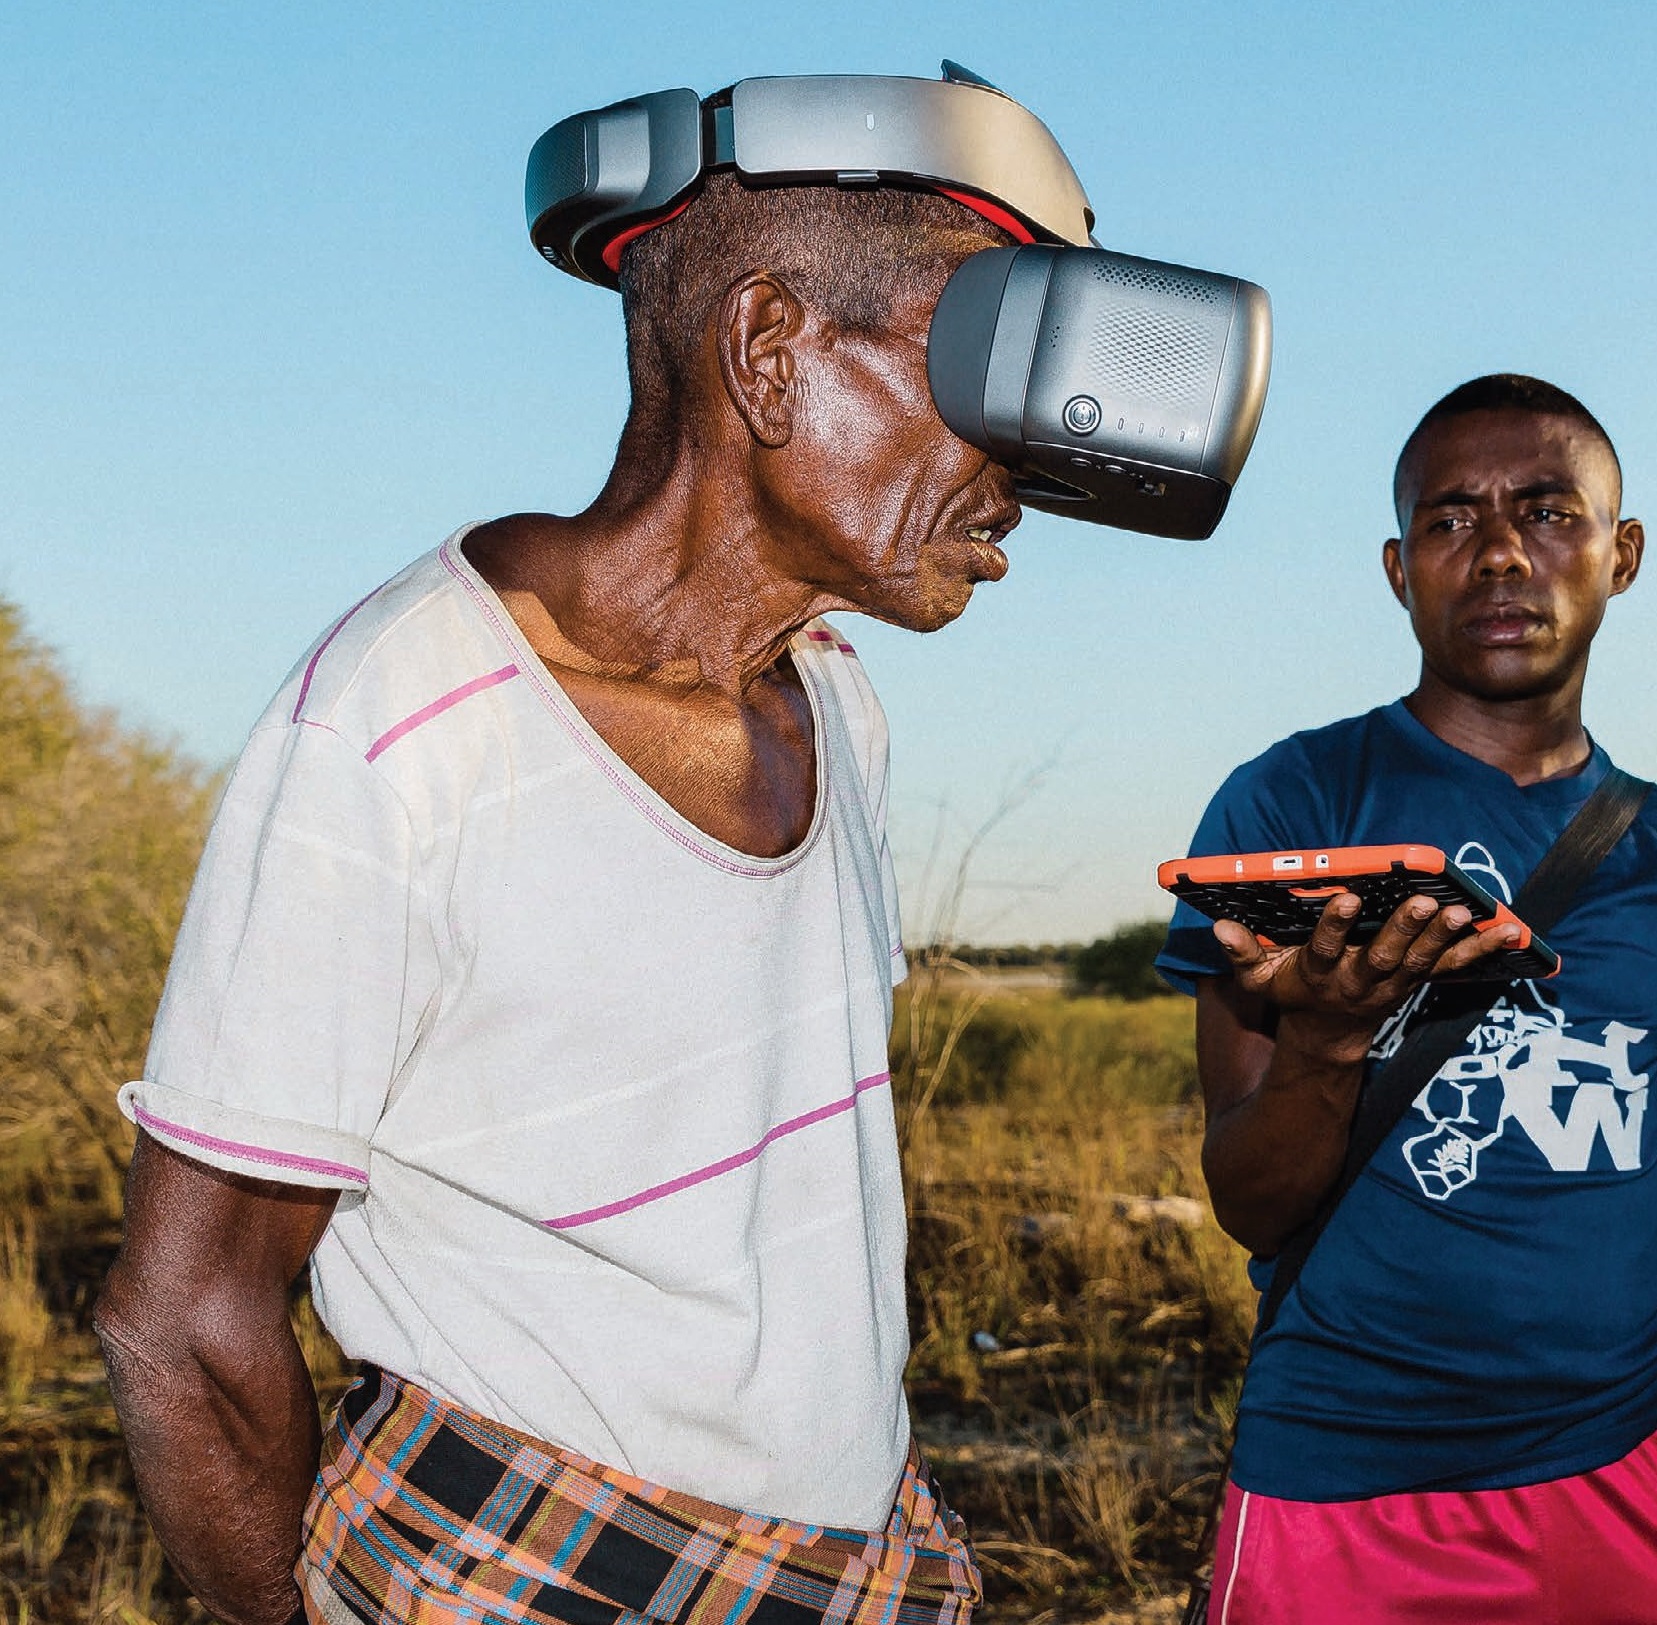 Blue sky, a man has a virtual reality mask, another man holds a tablet while looking at the first man..